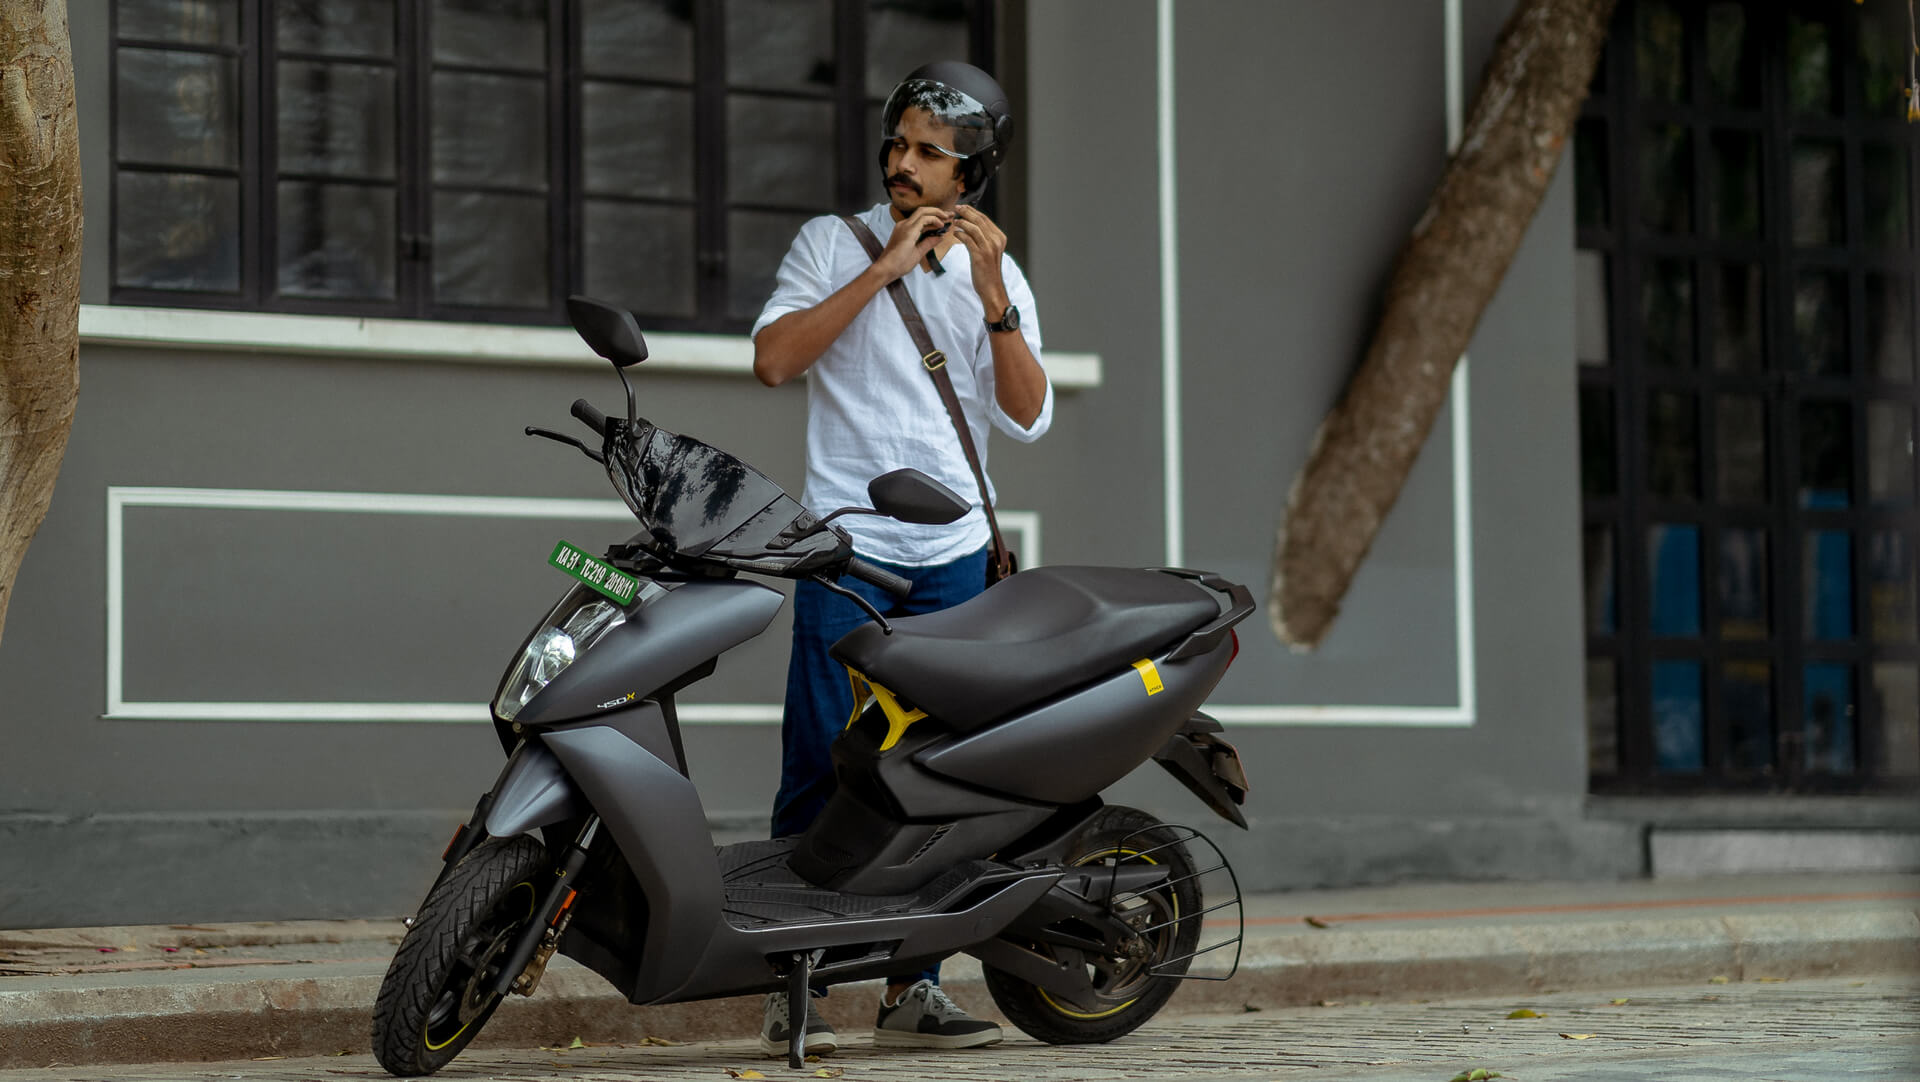 Bike and Scooter Rentals for Riders of All Levels